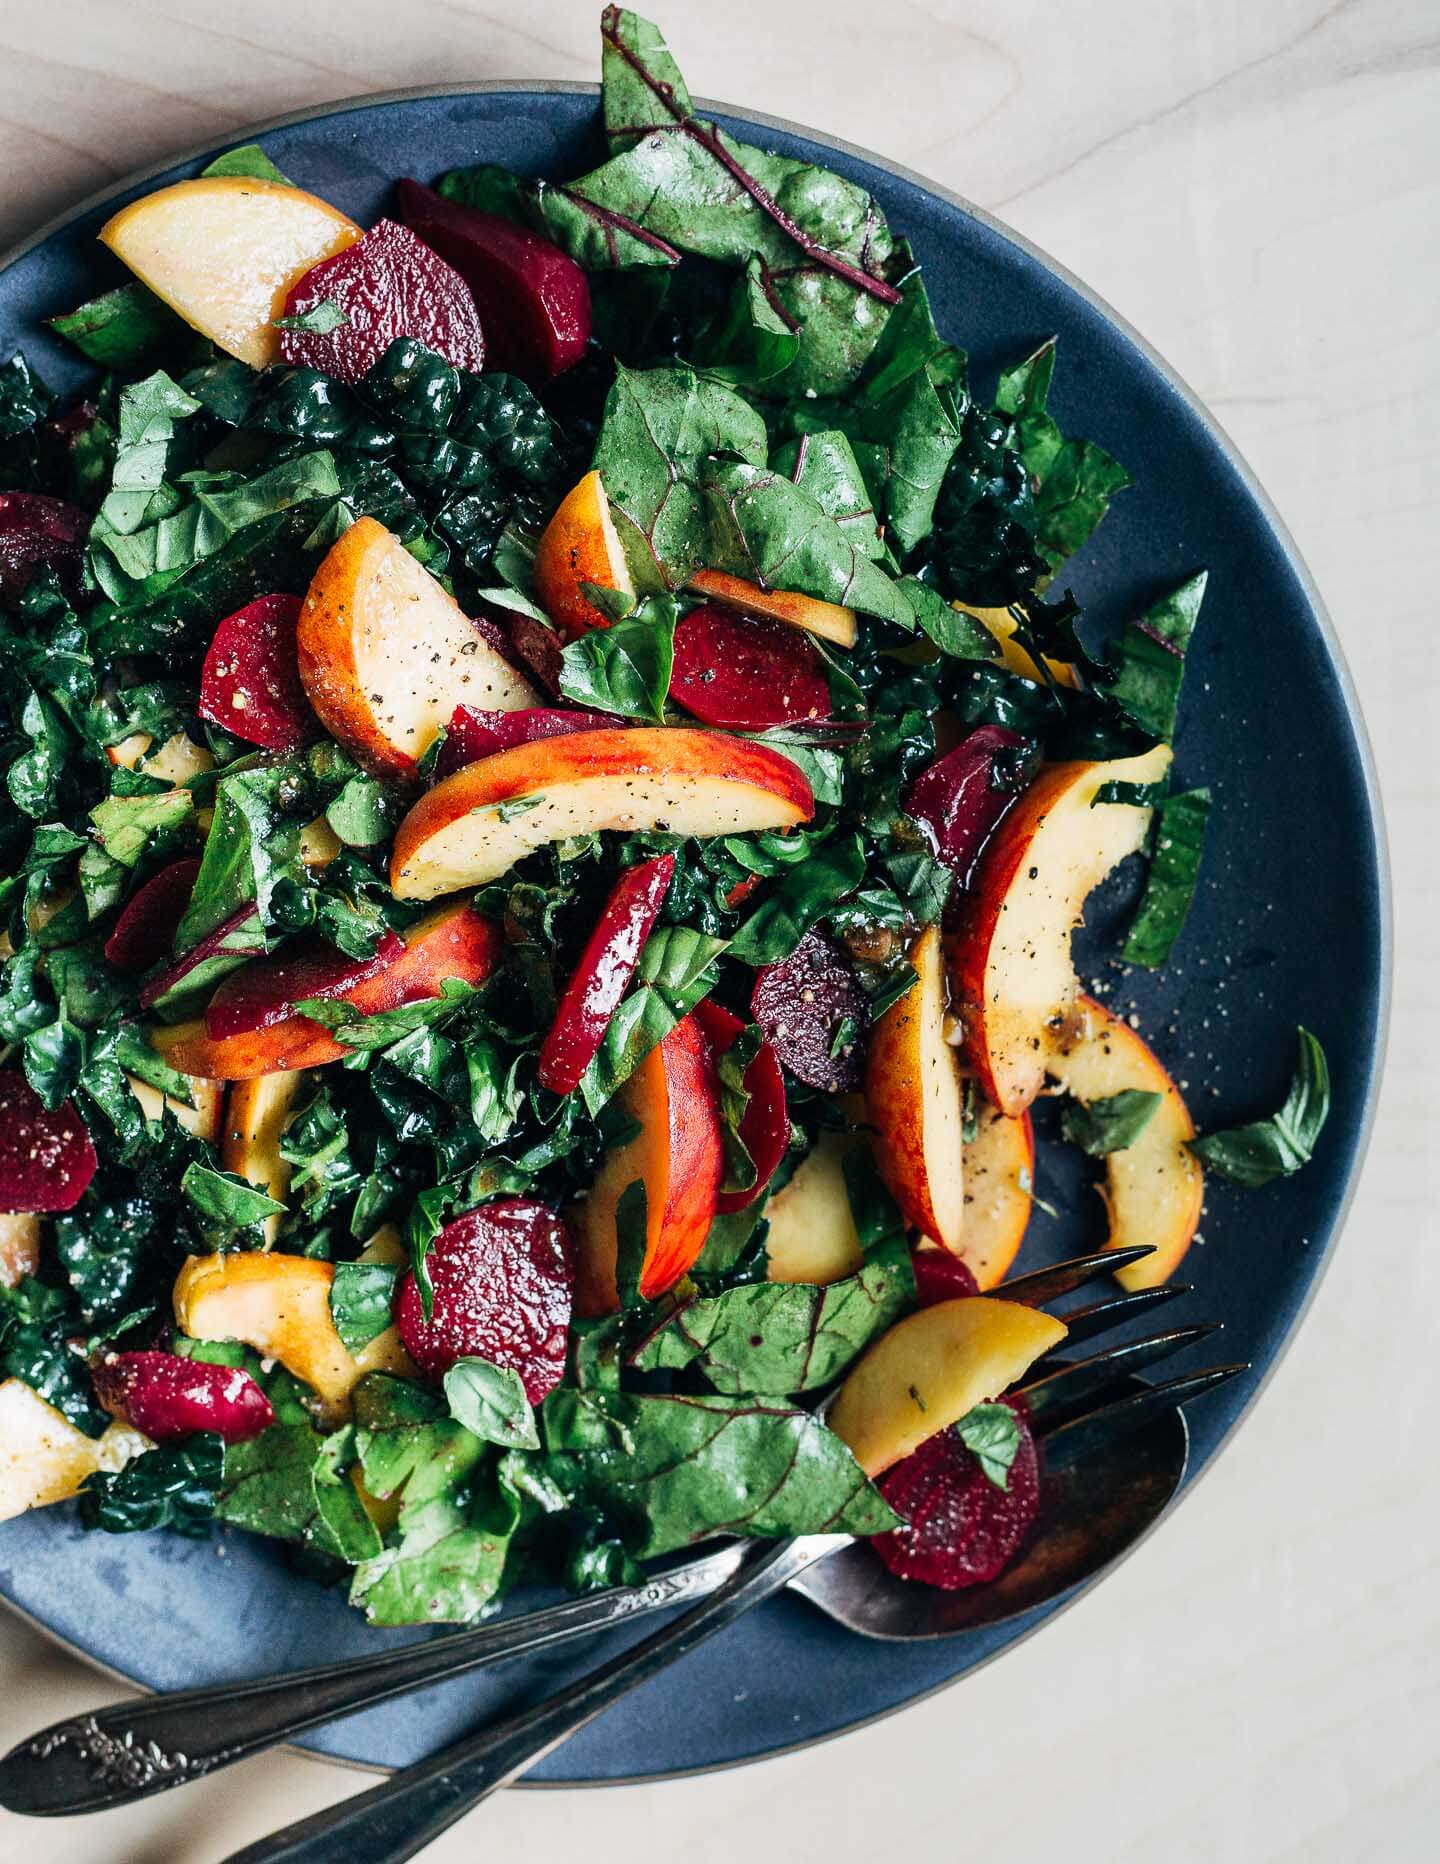 A platter with a tossed beet, peach, and greens salad.